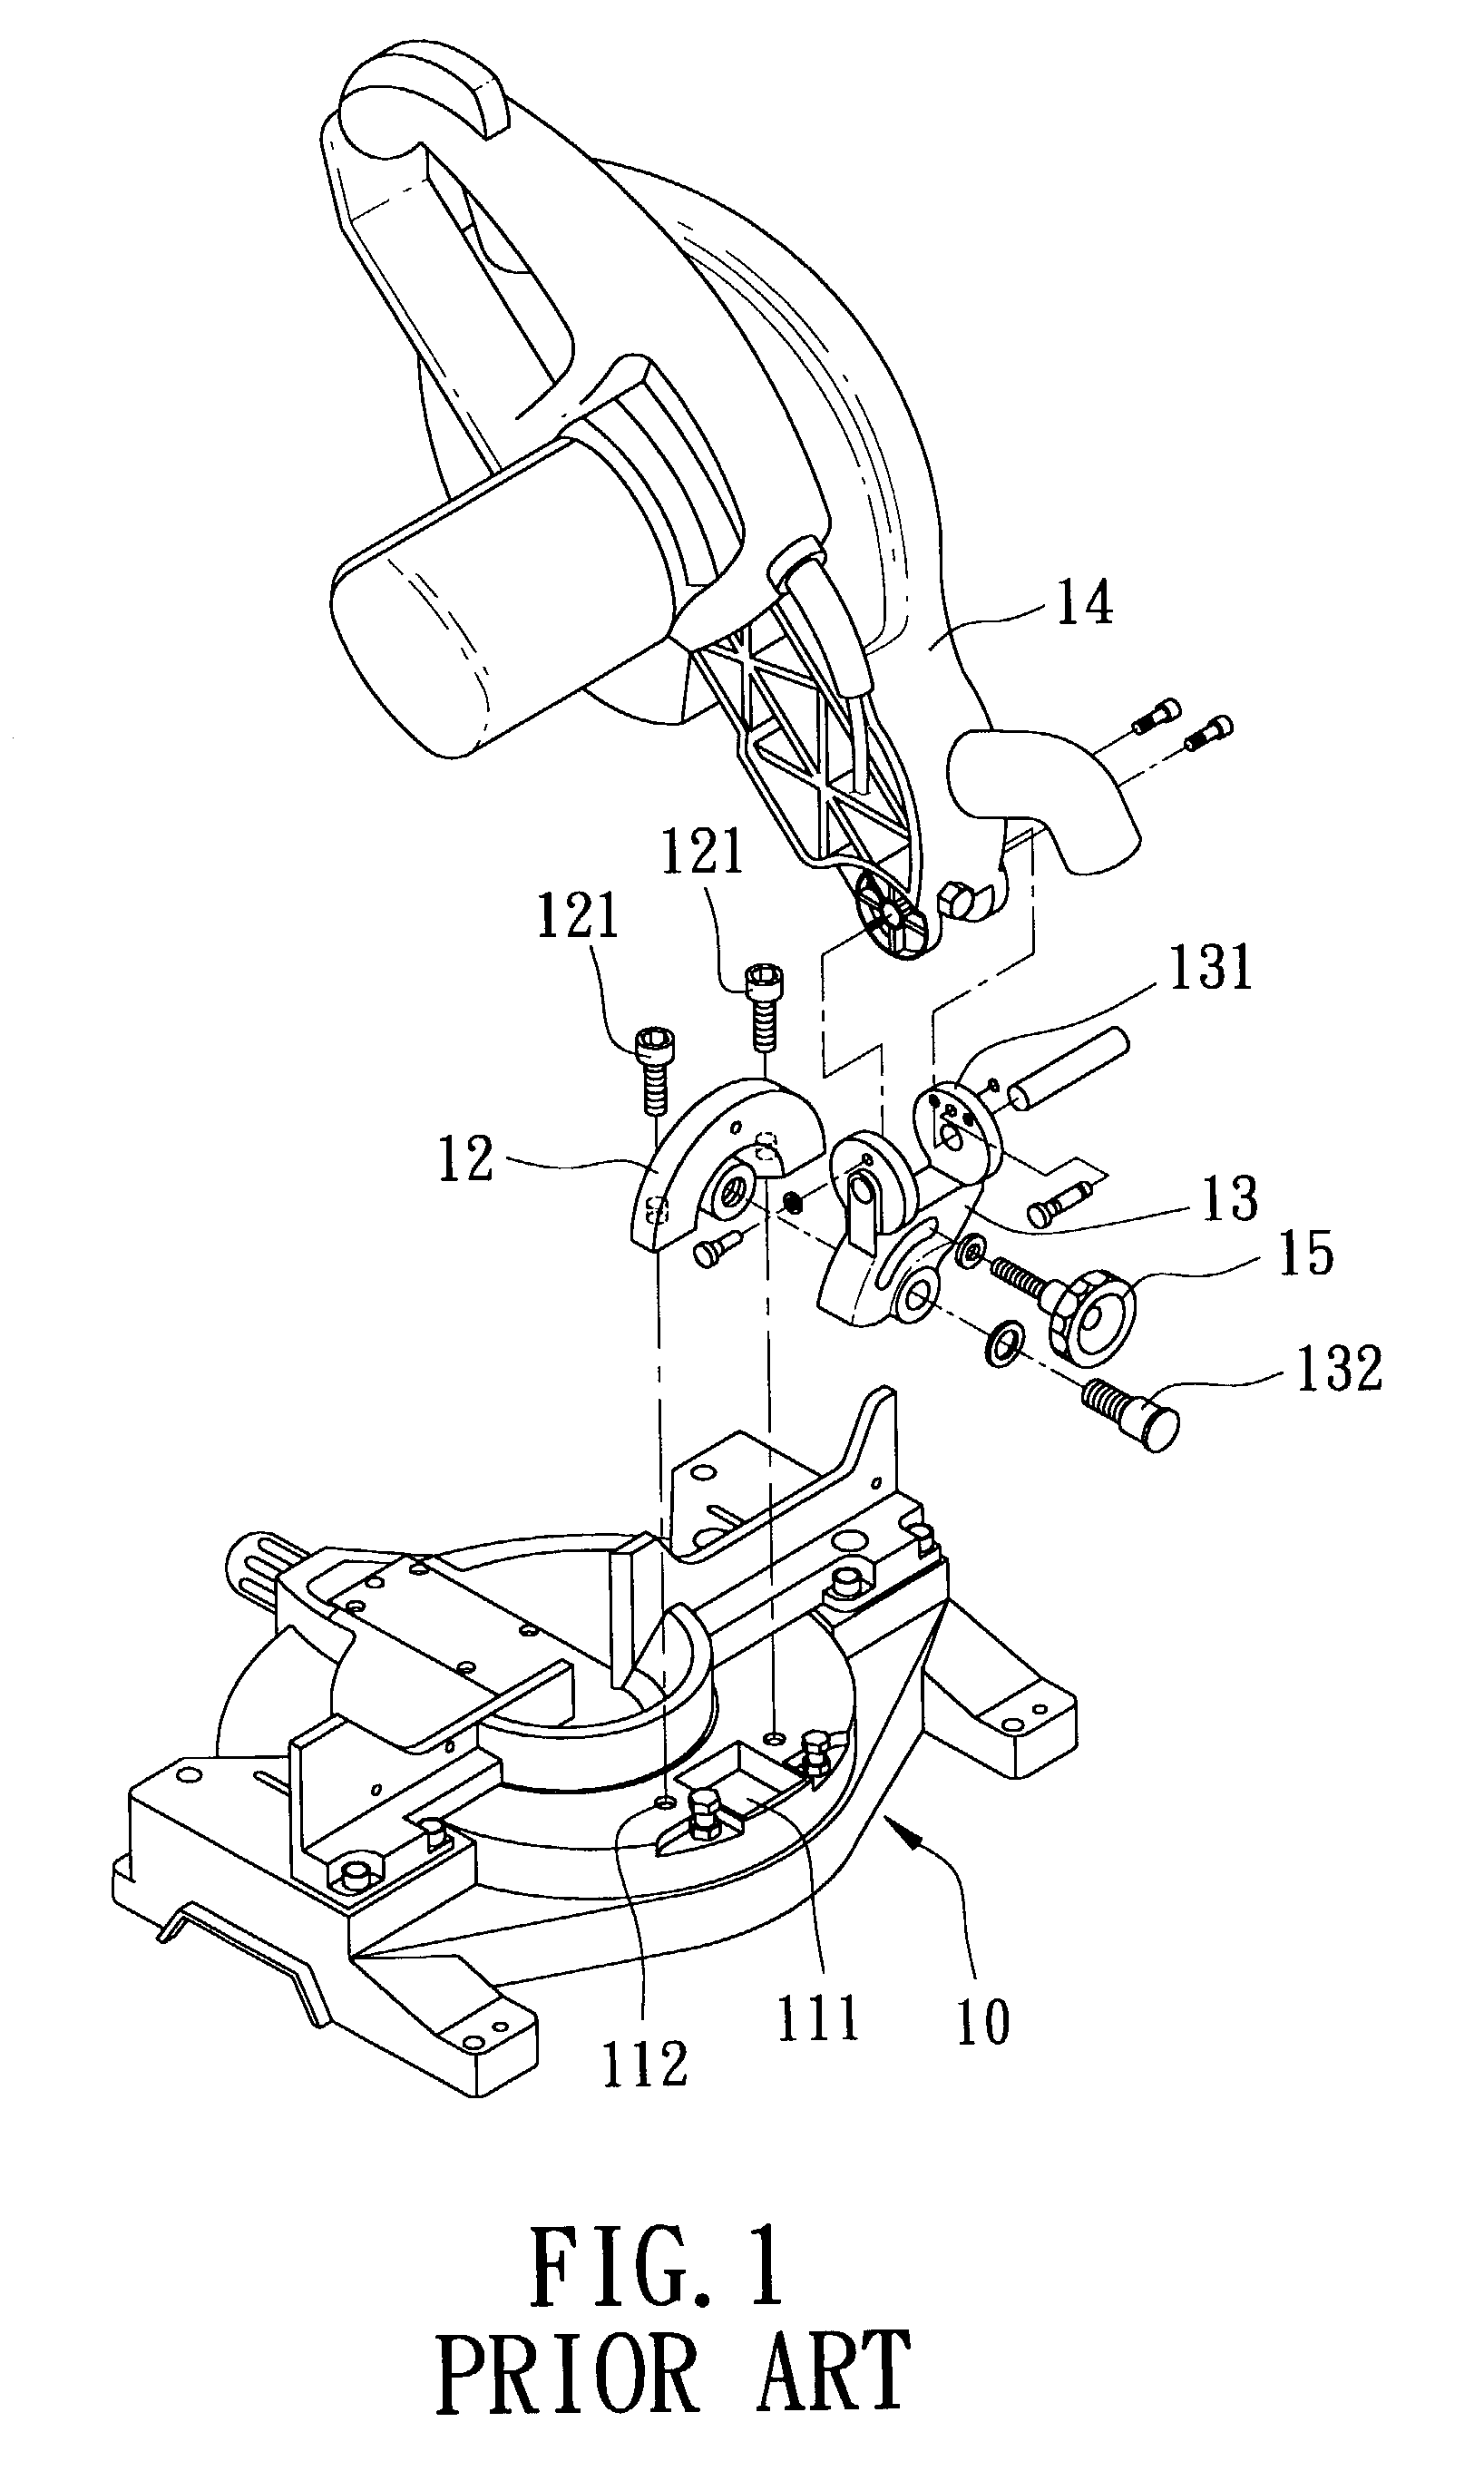 Circular cutter with a friction-provided plate